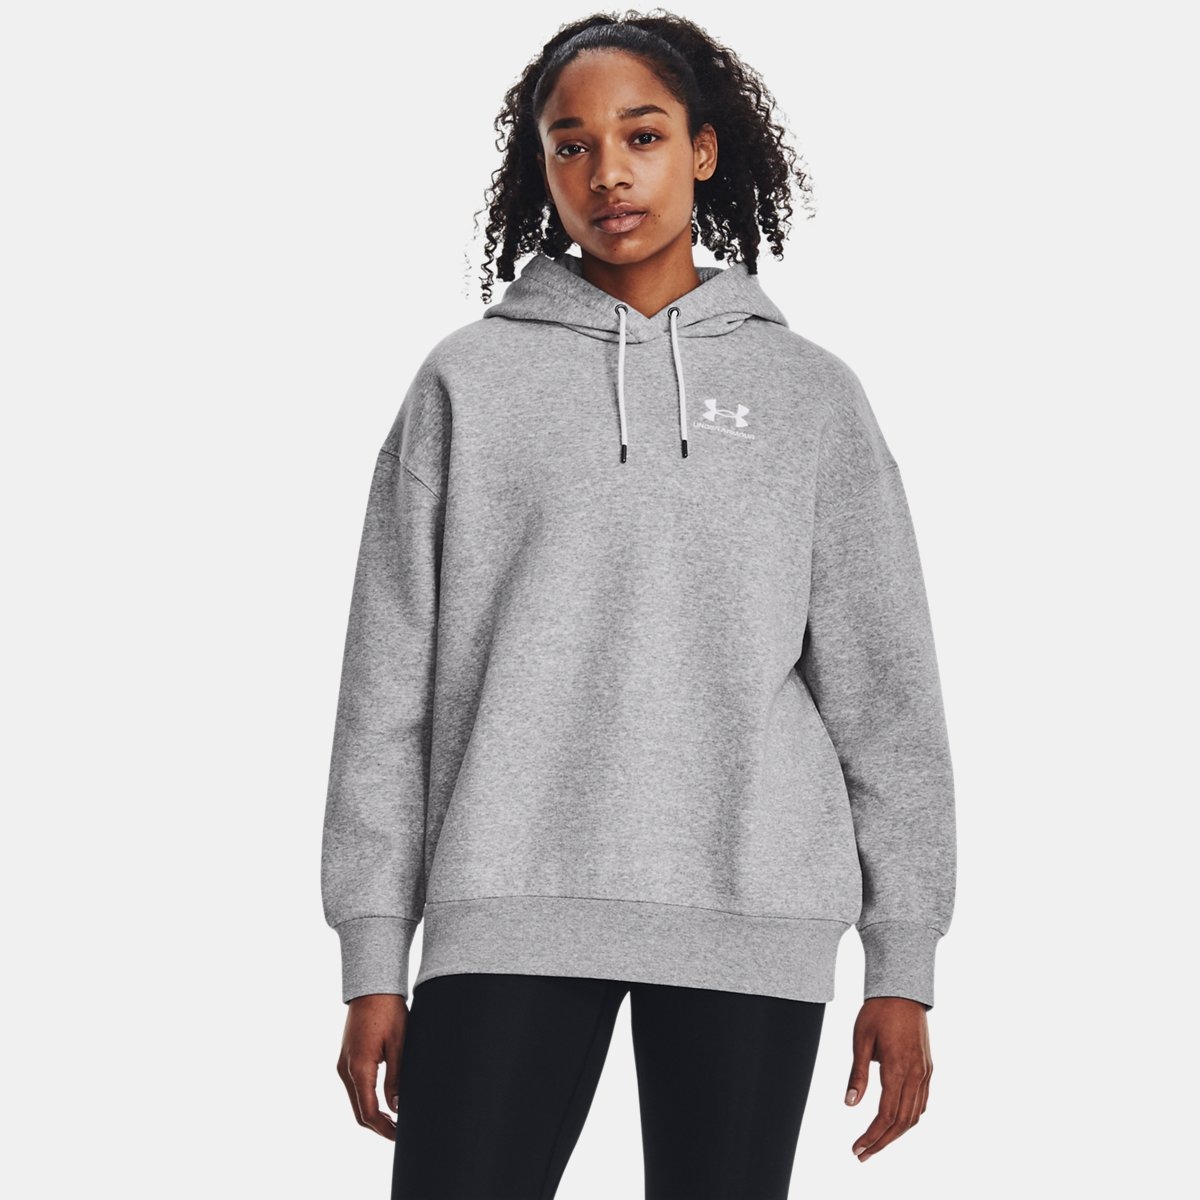 Lady Grey Hoodie from Under Armour GOOFASH